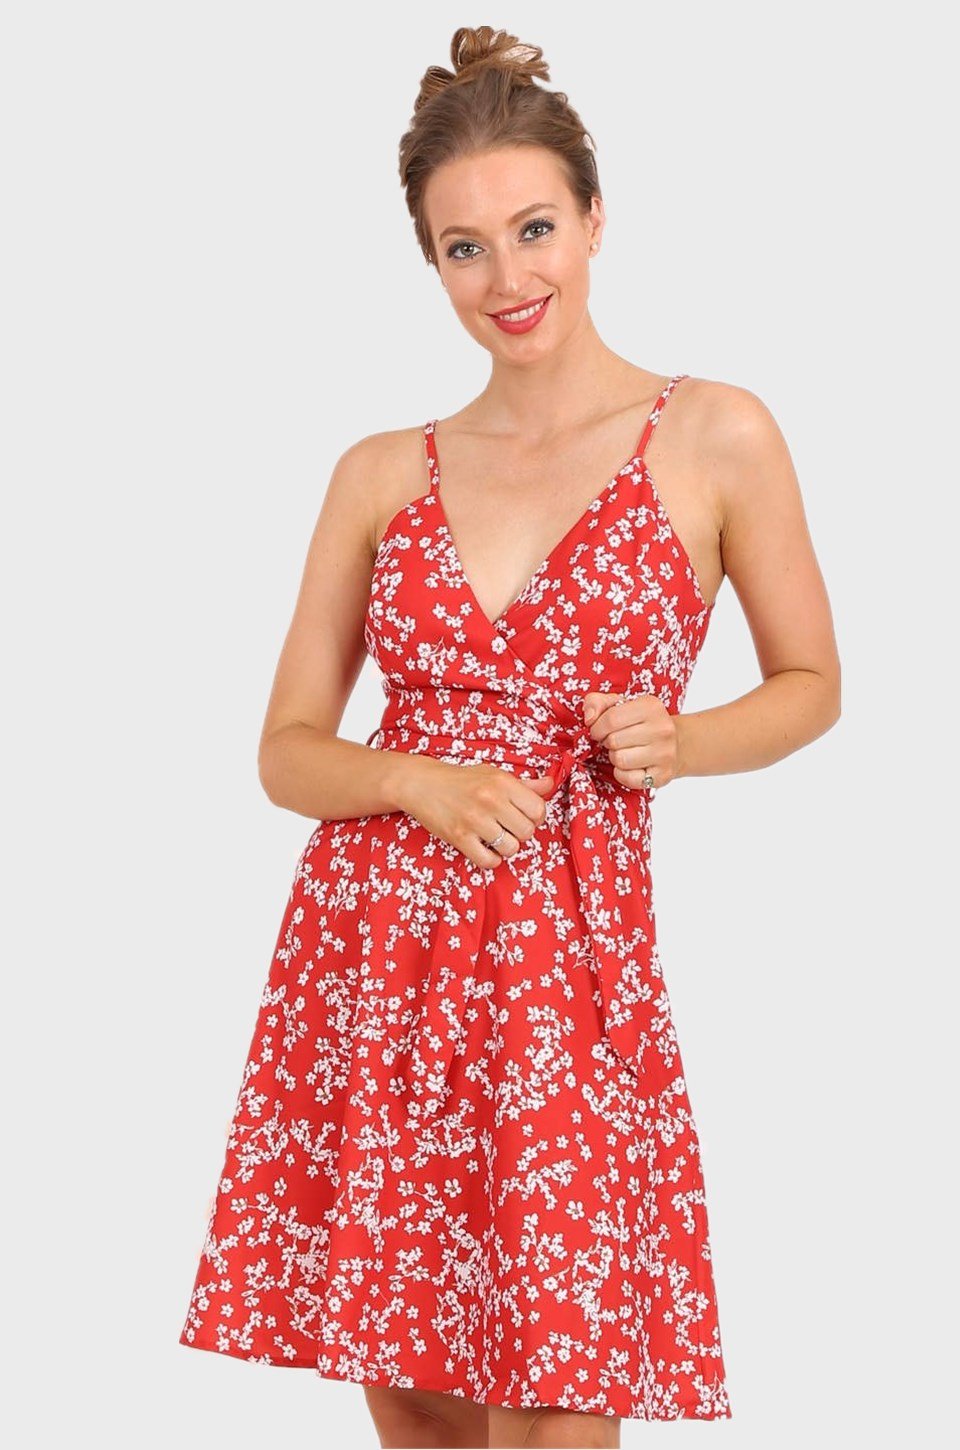 MISS PINKI Raelynn Floral Satin Party Dress in Red Ditsy